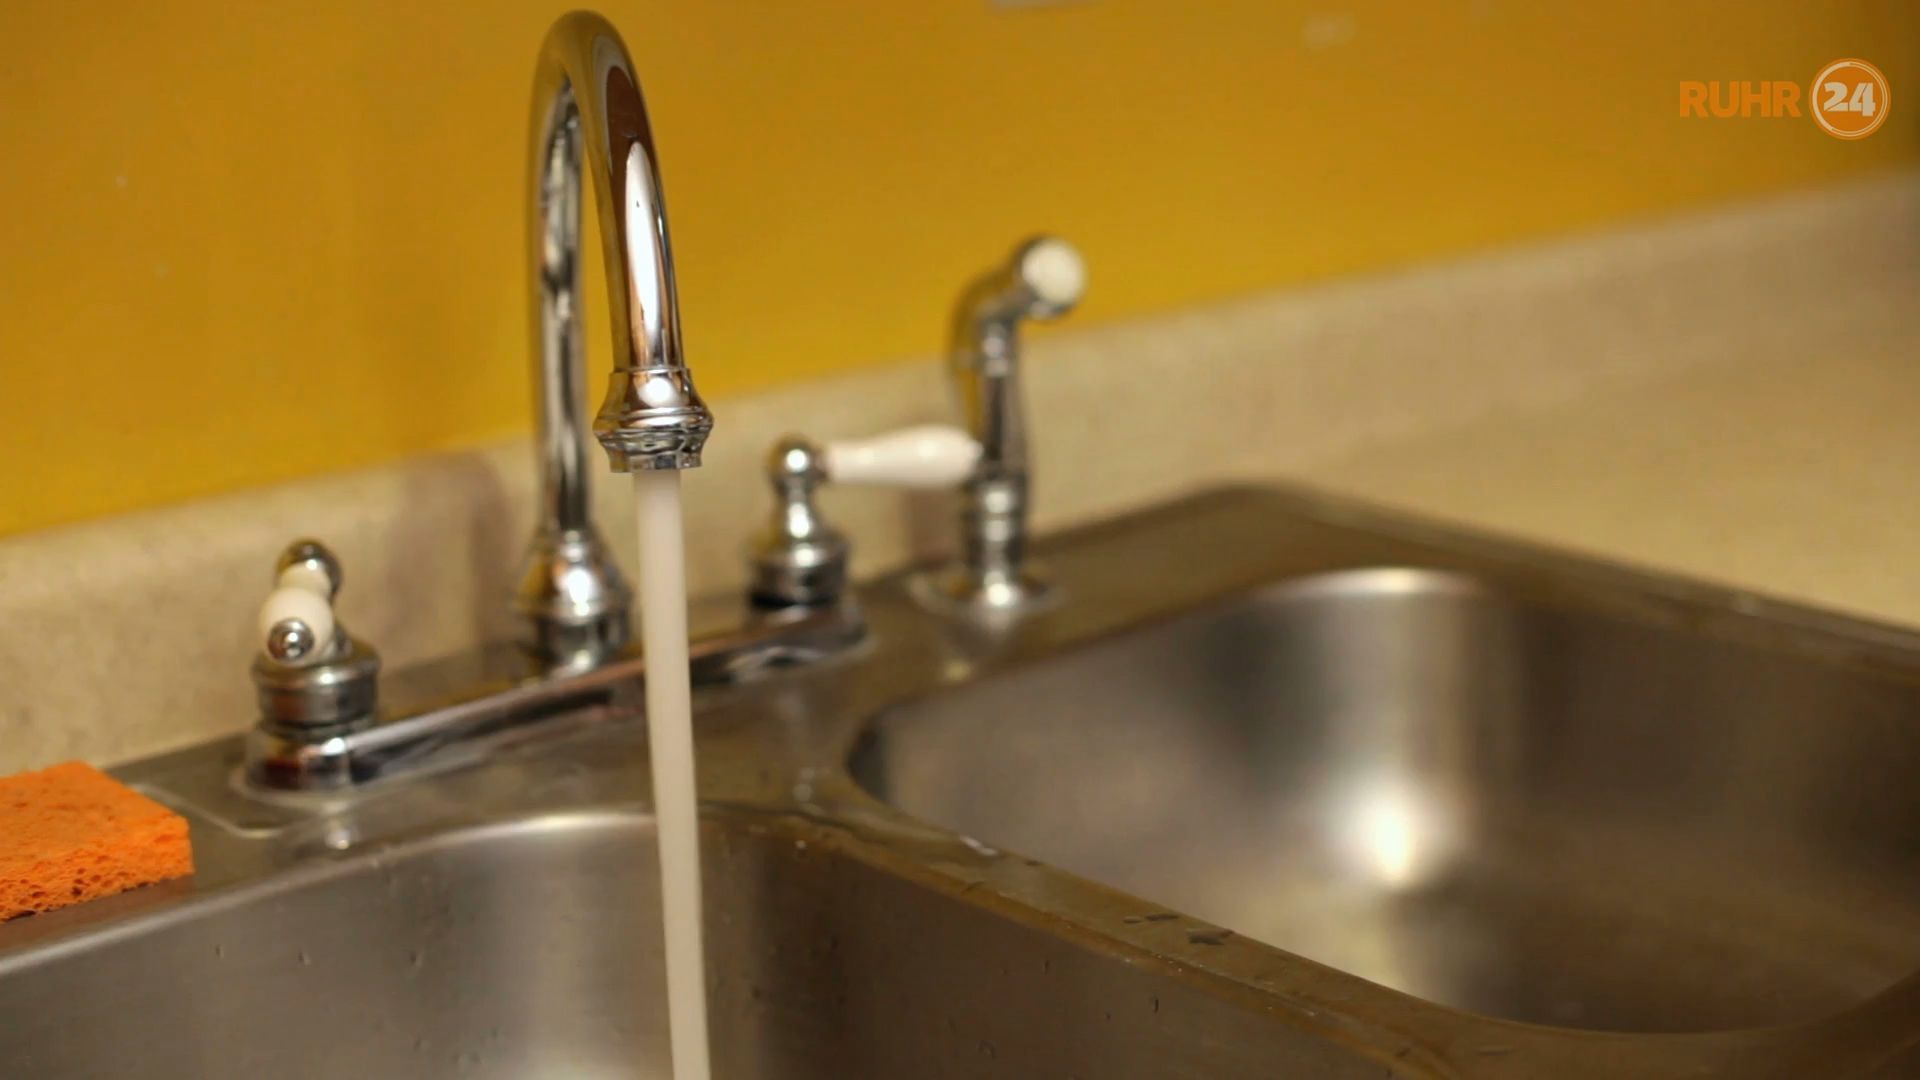 Sparkling clean: Home remedy makes the sink shine again